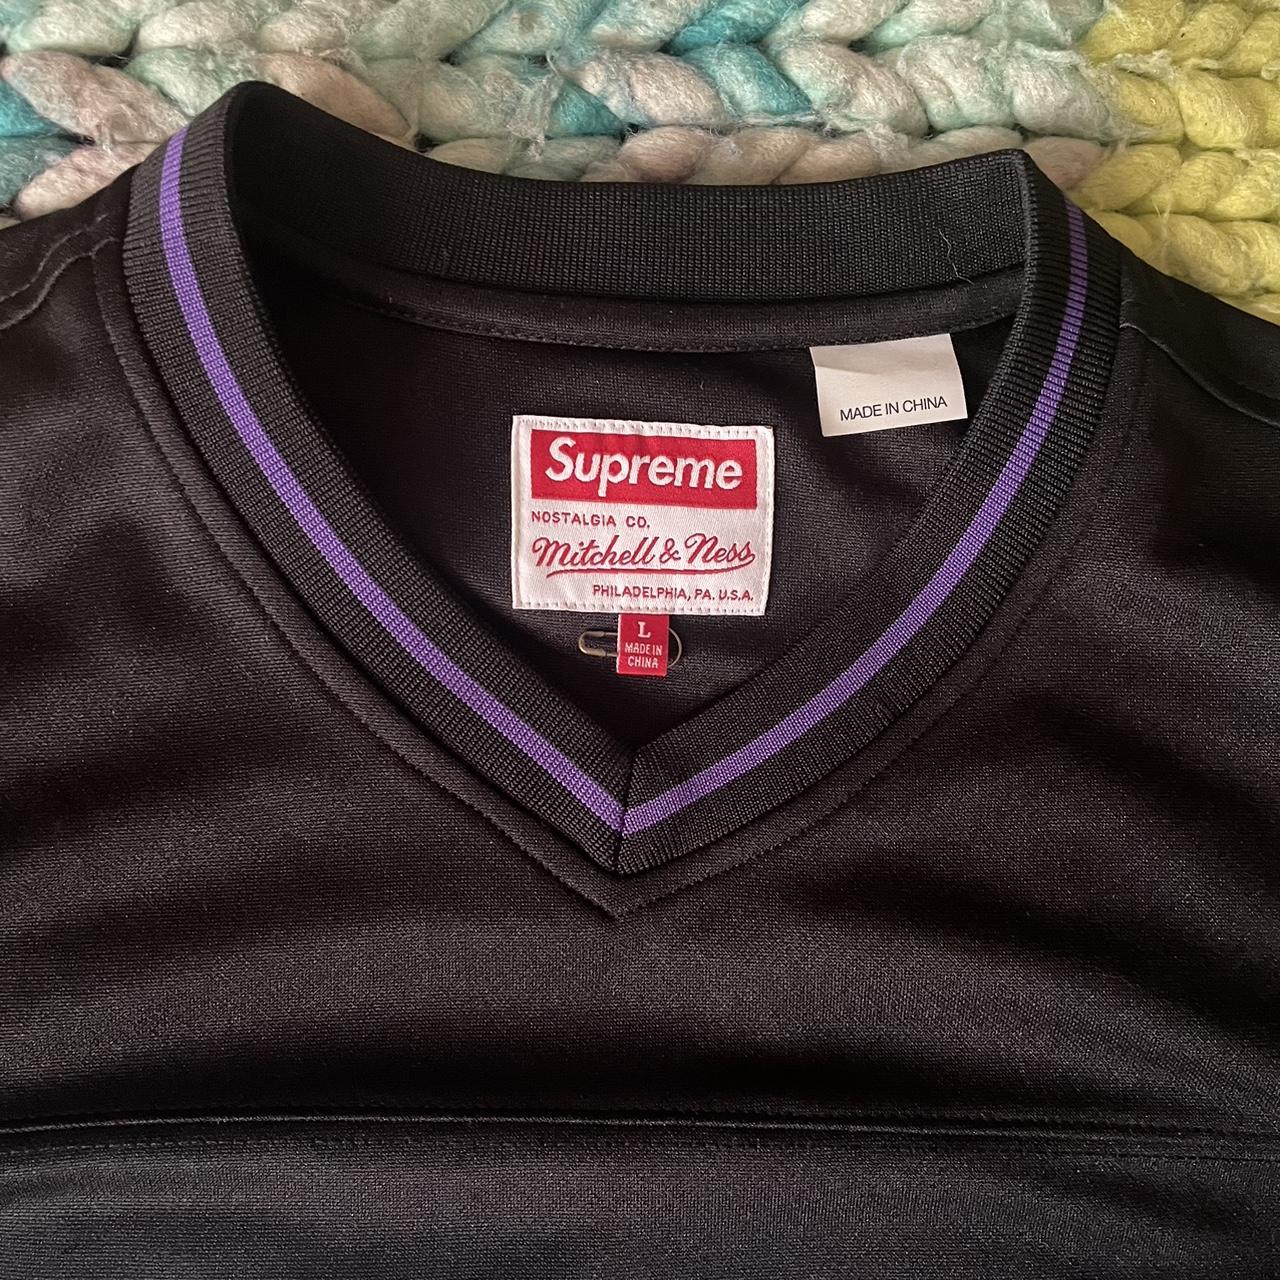 Supreme Mitchell & Ness Jersey for Sale in North Las Vegas, NV - OfferUp